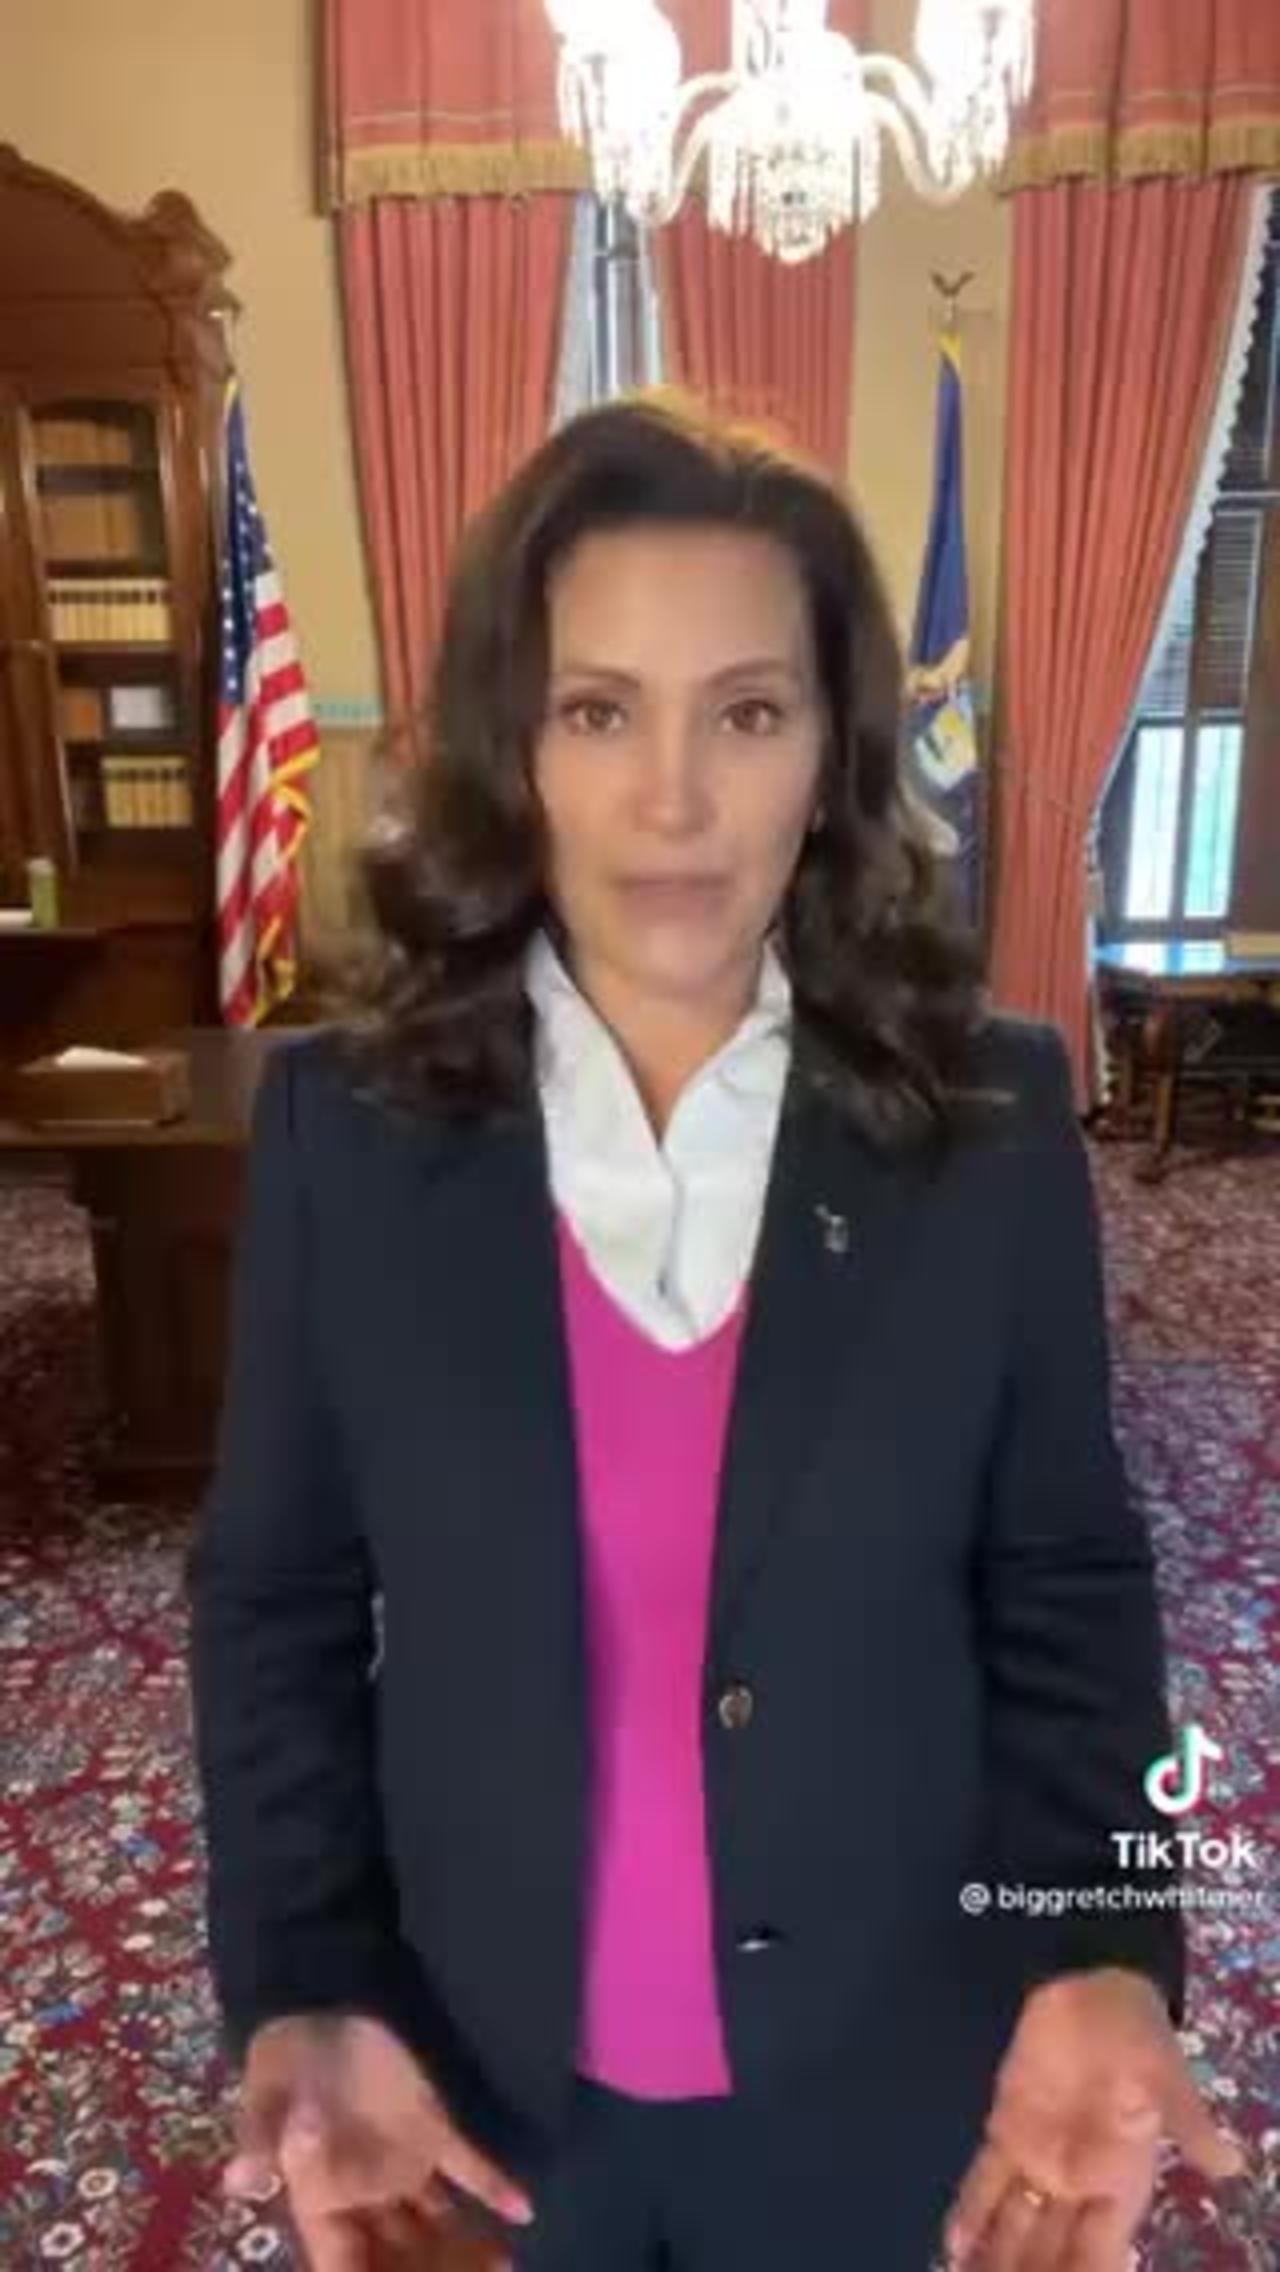 Michigan Gov. Gretchen Whitmer Refers to Women as "People With a Period"